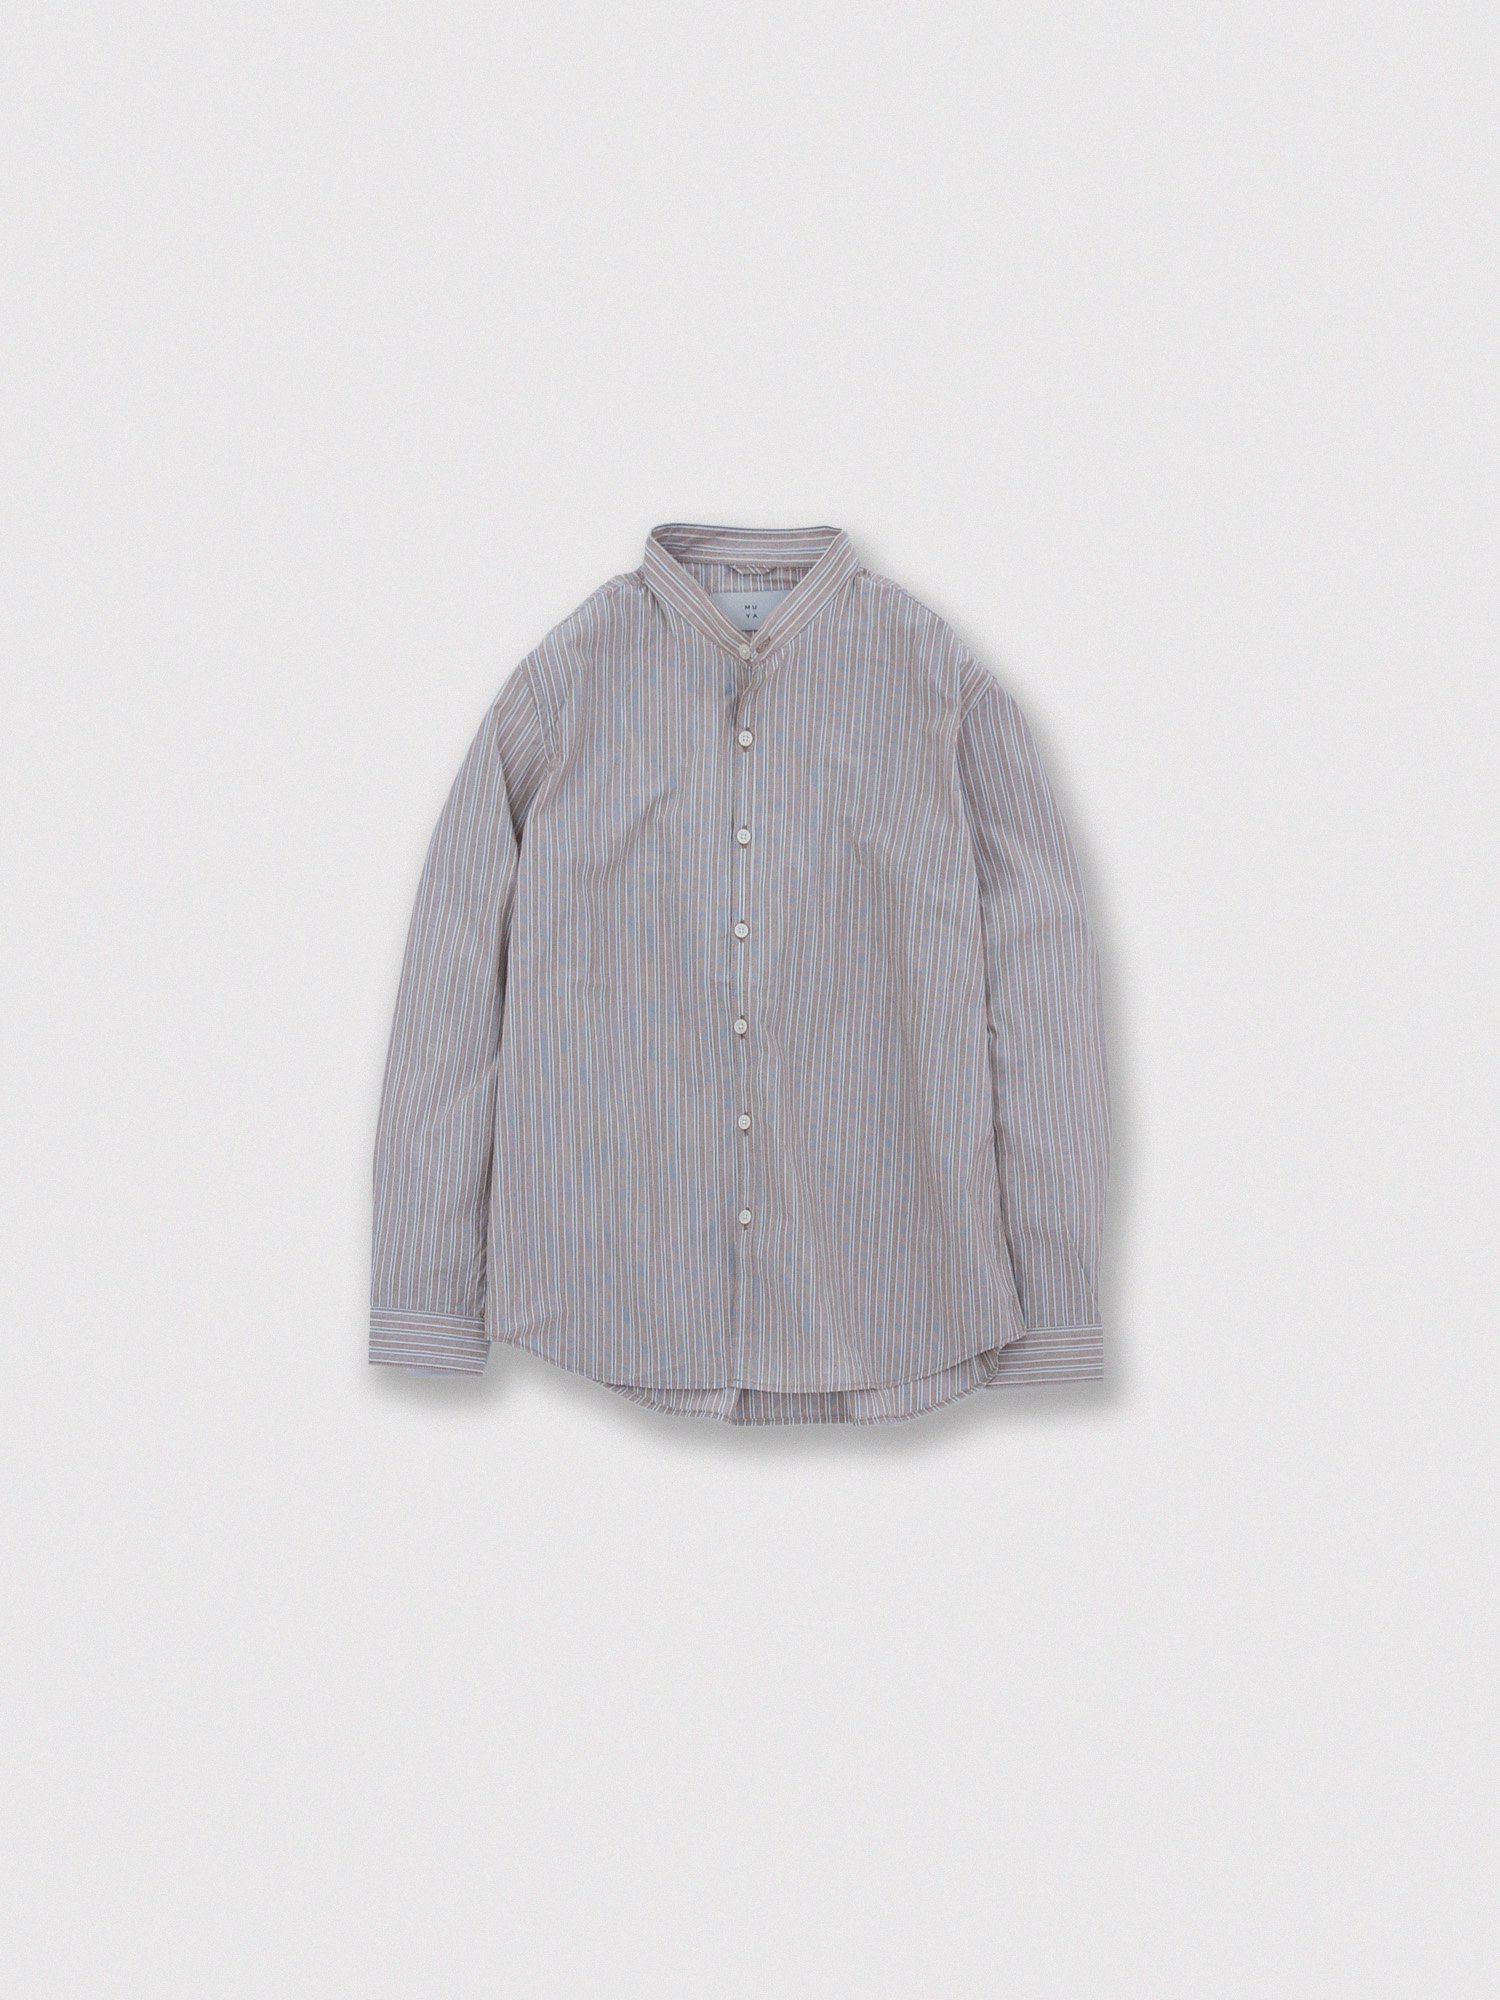 60/1 Atelier shirts relax<br /> Stand collar<br />  Brown stripe